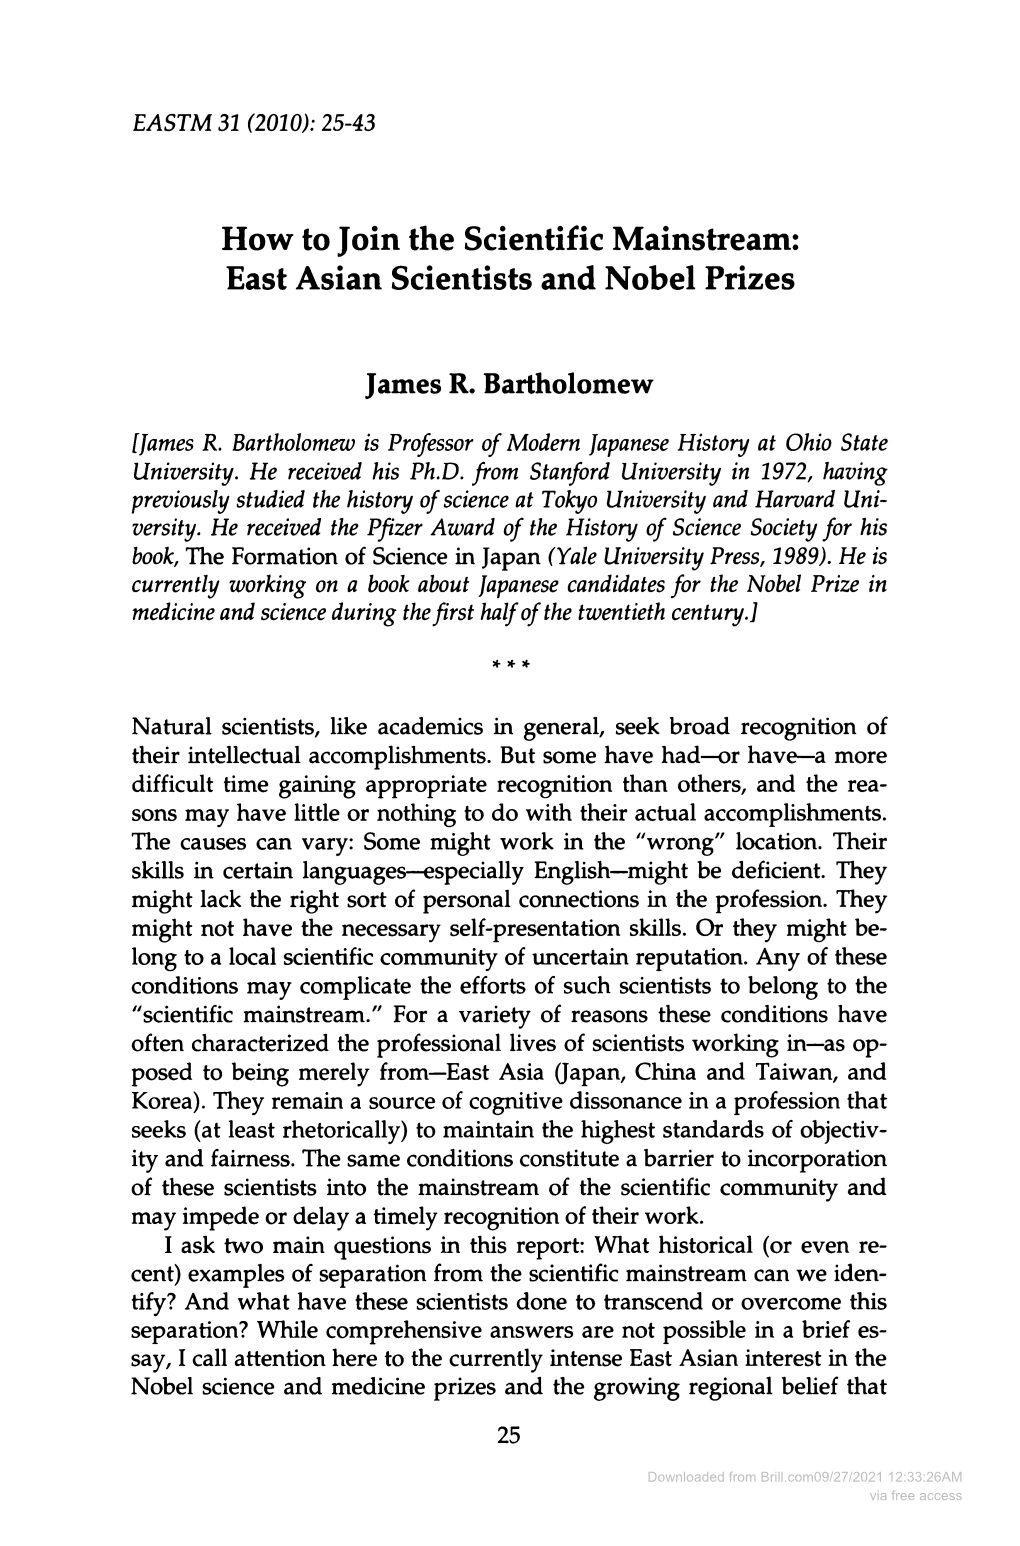 East Asian Scientists and Nobel Prizes